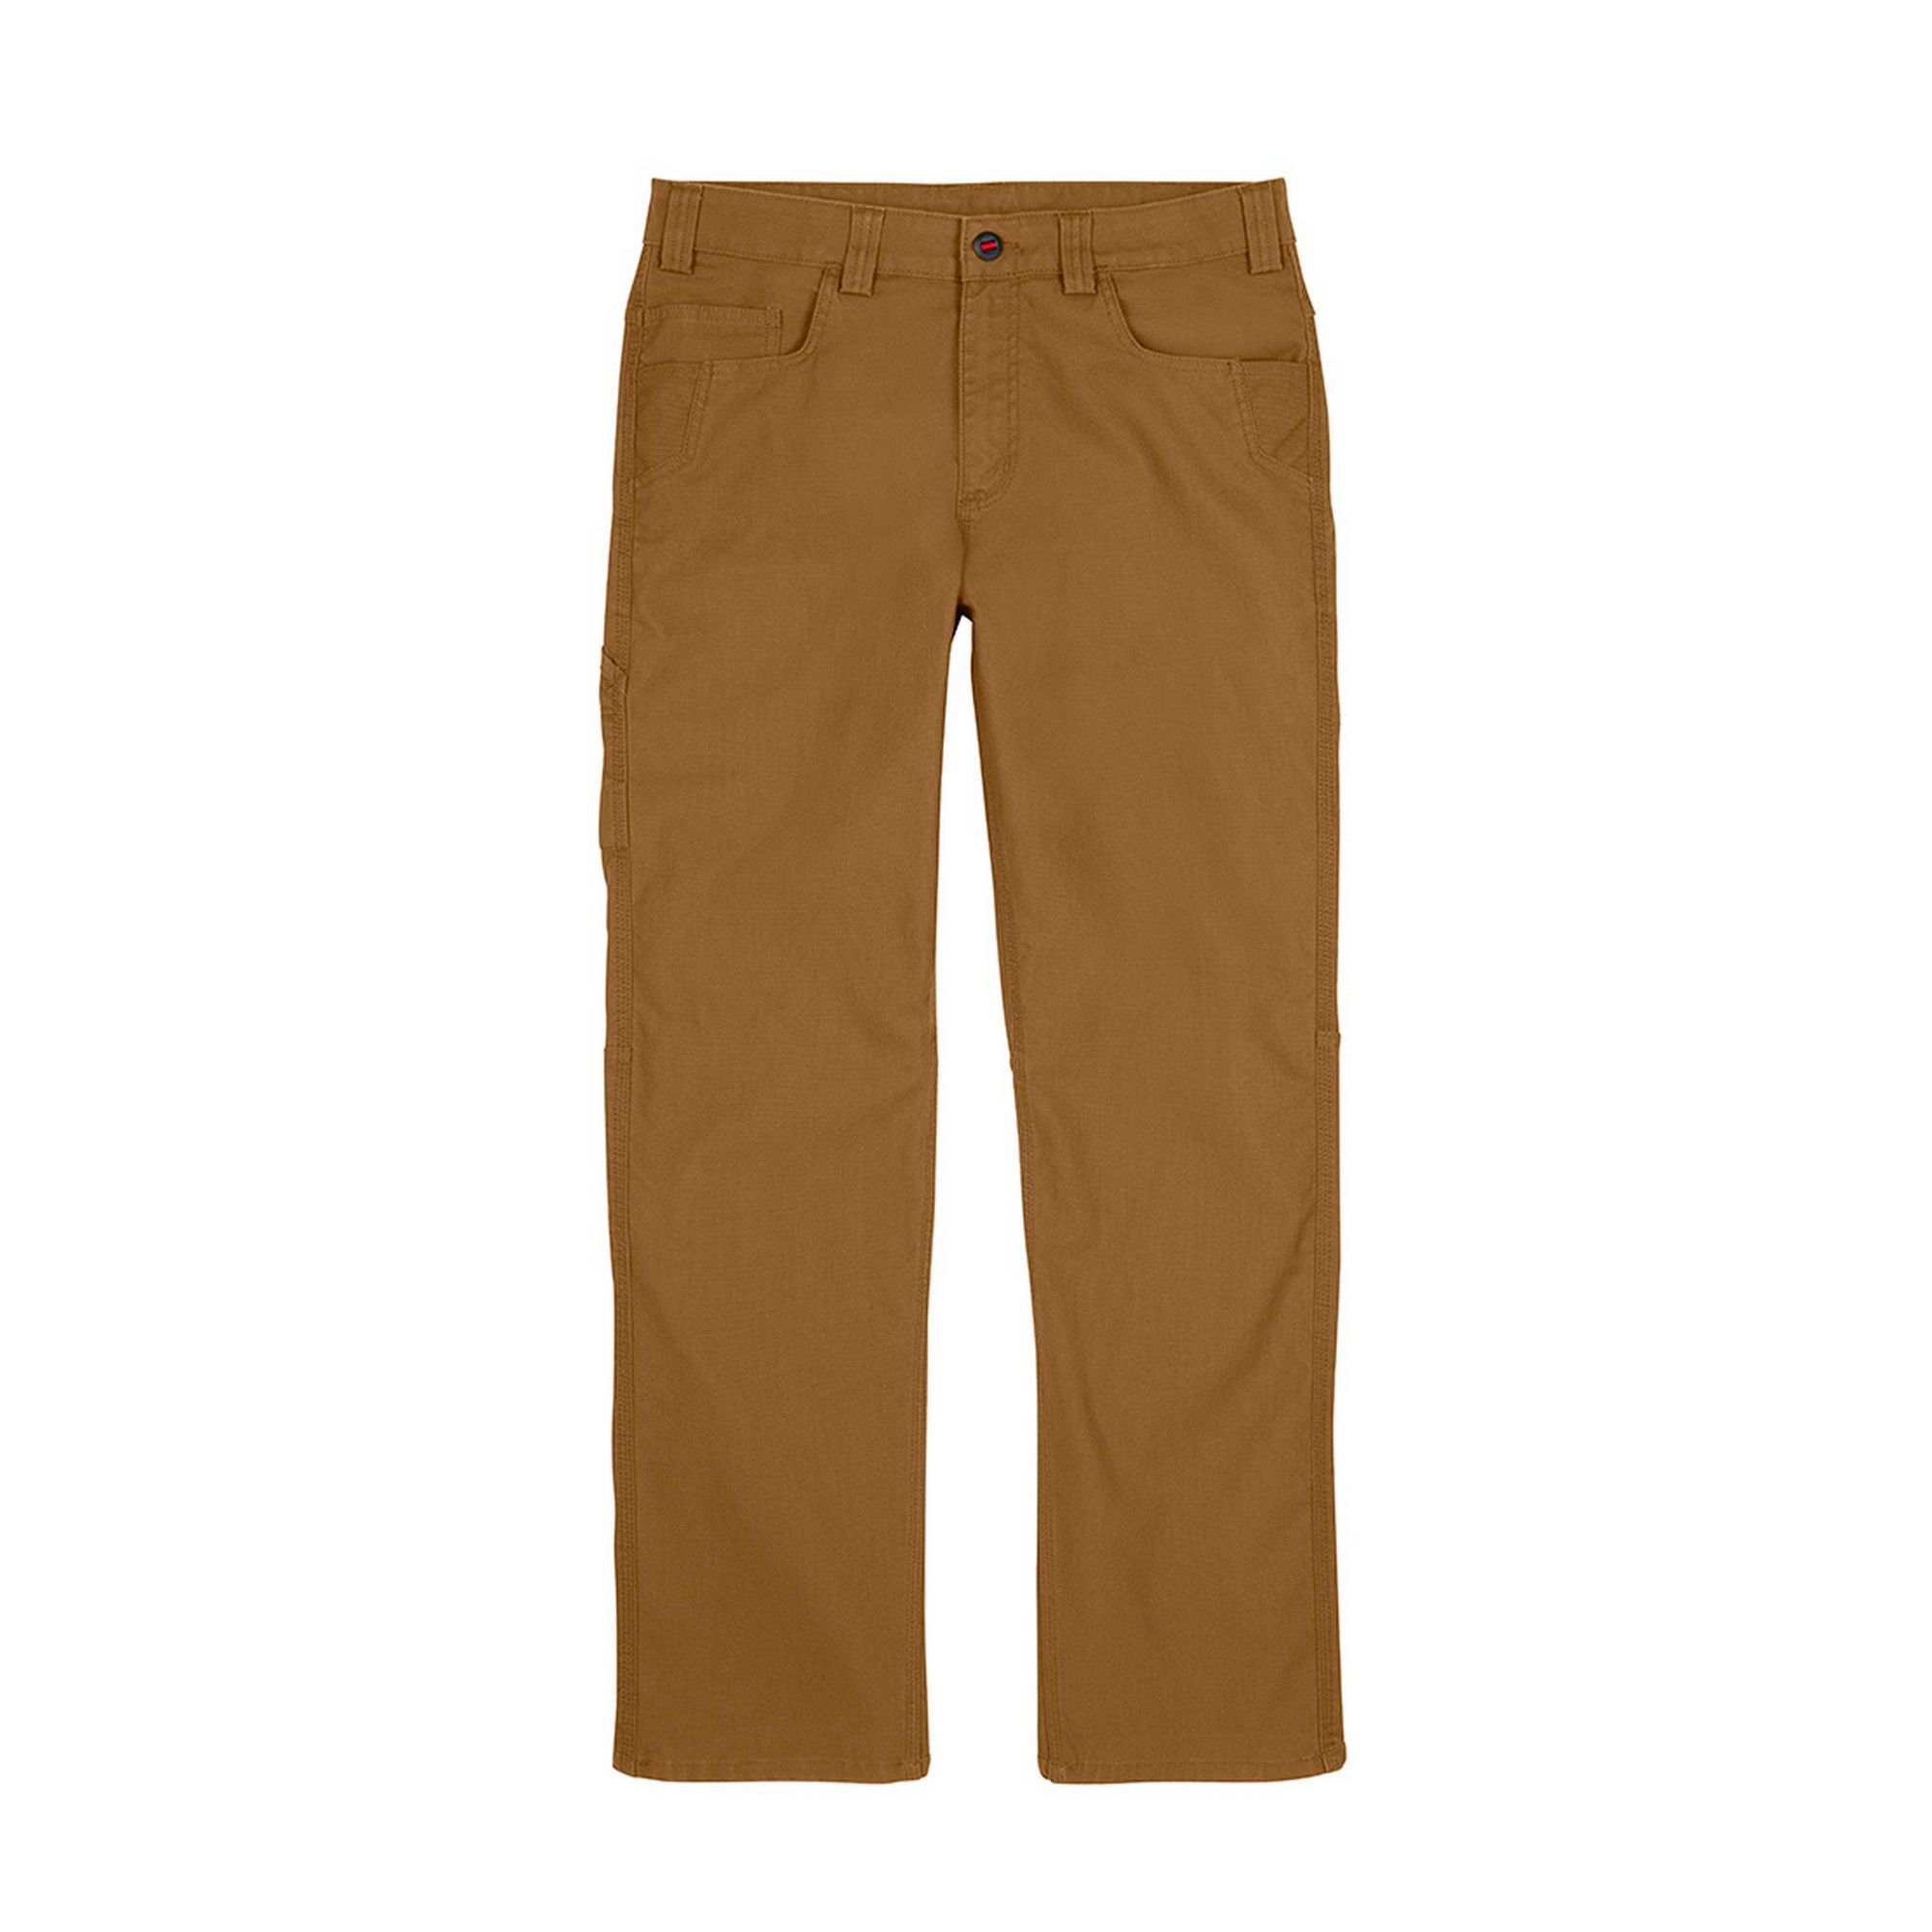 QUILTED LINED WORK PANTS - Jackfield